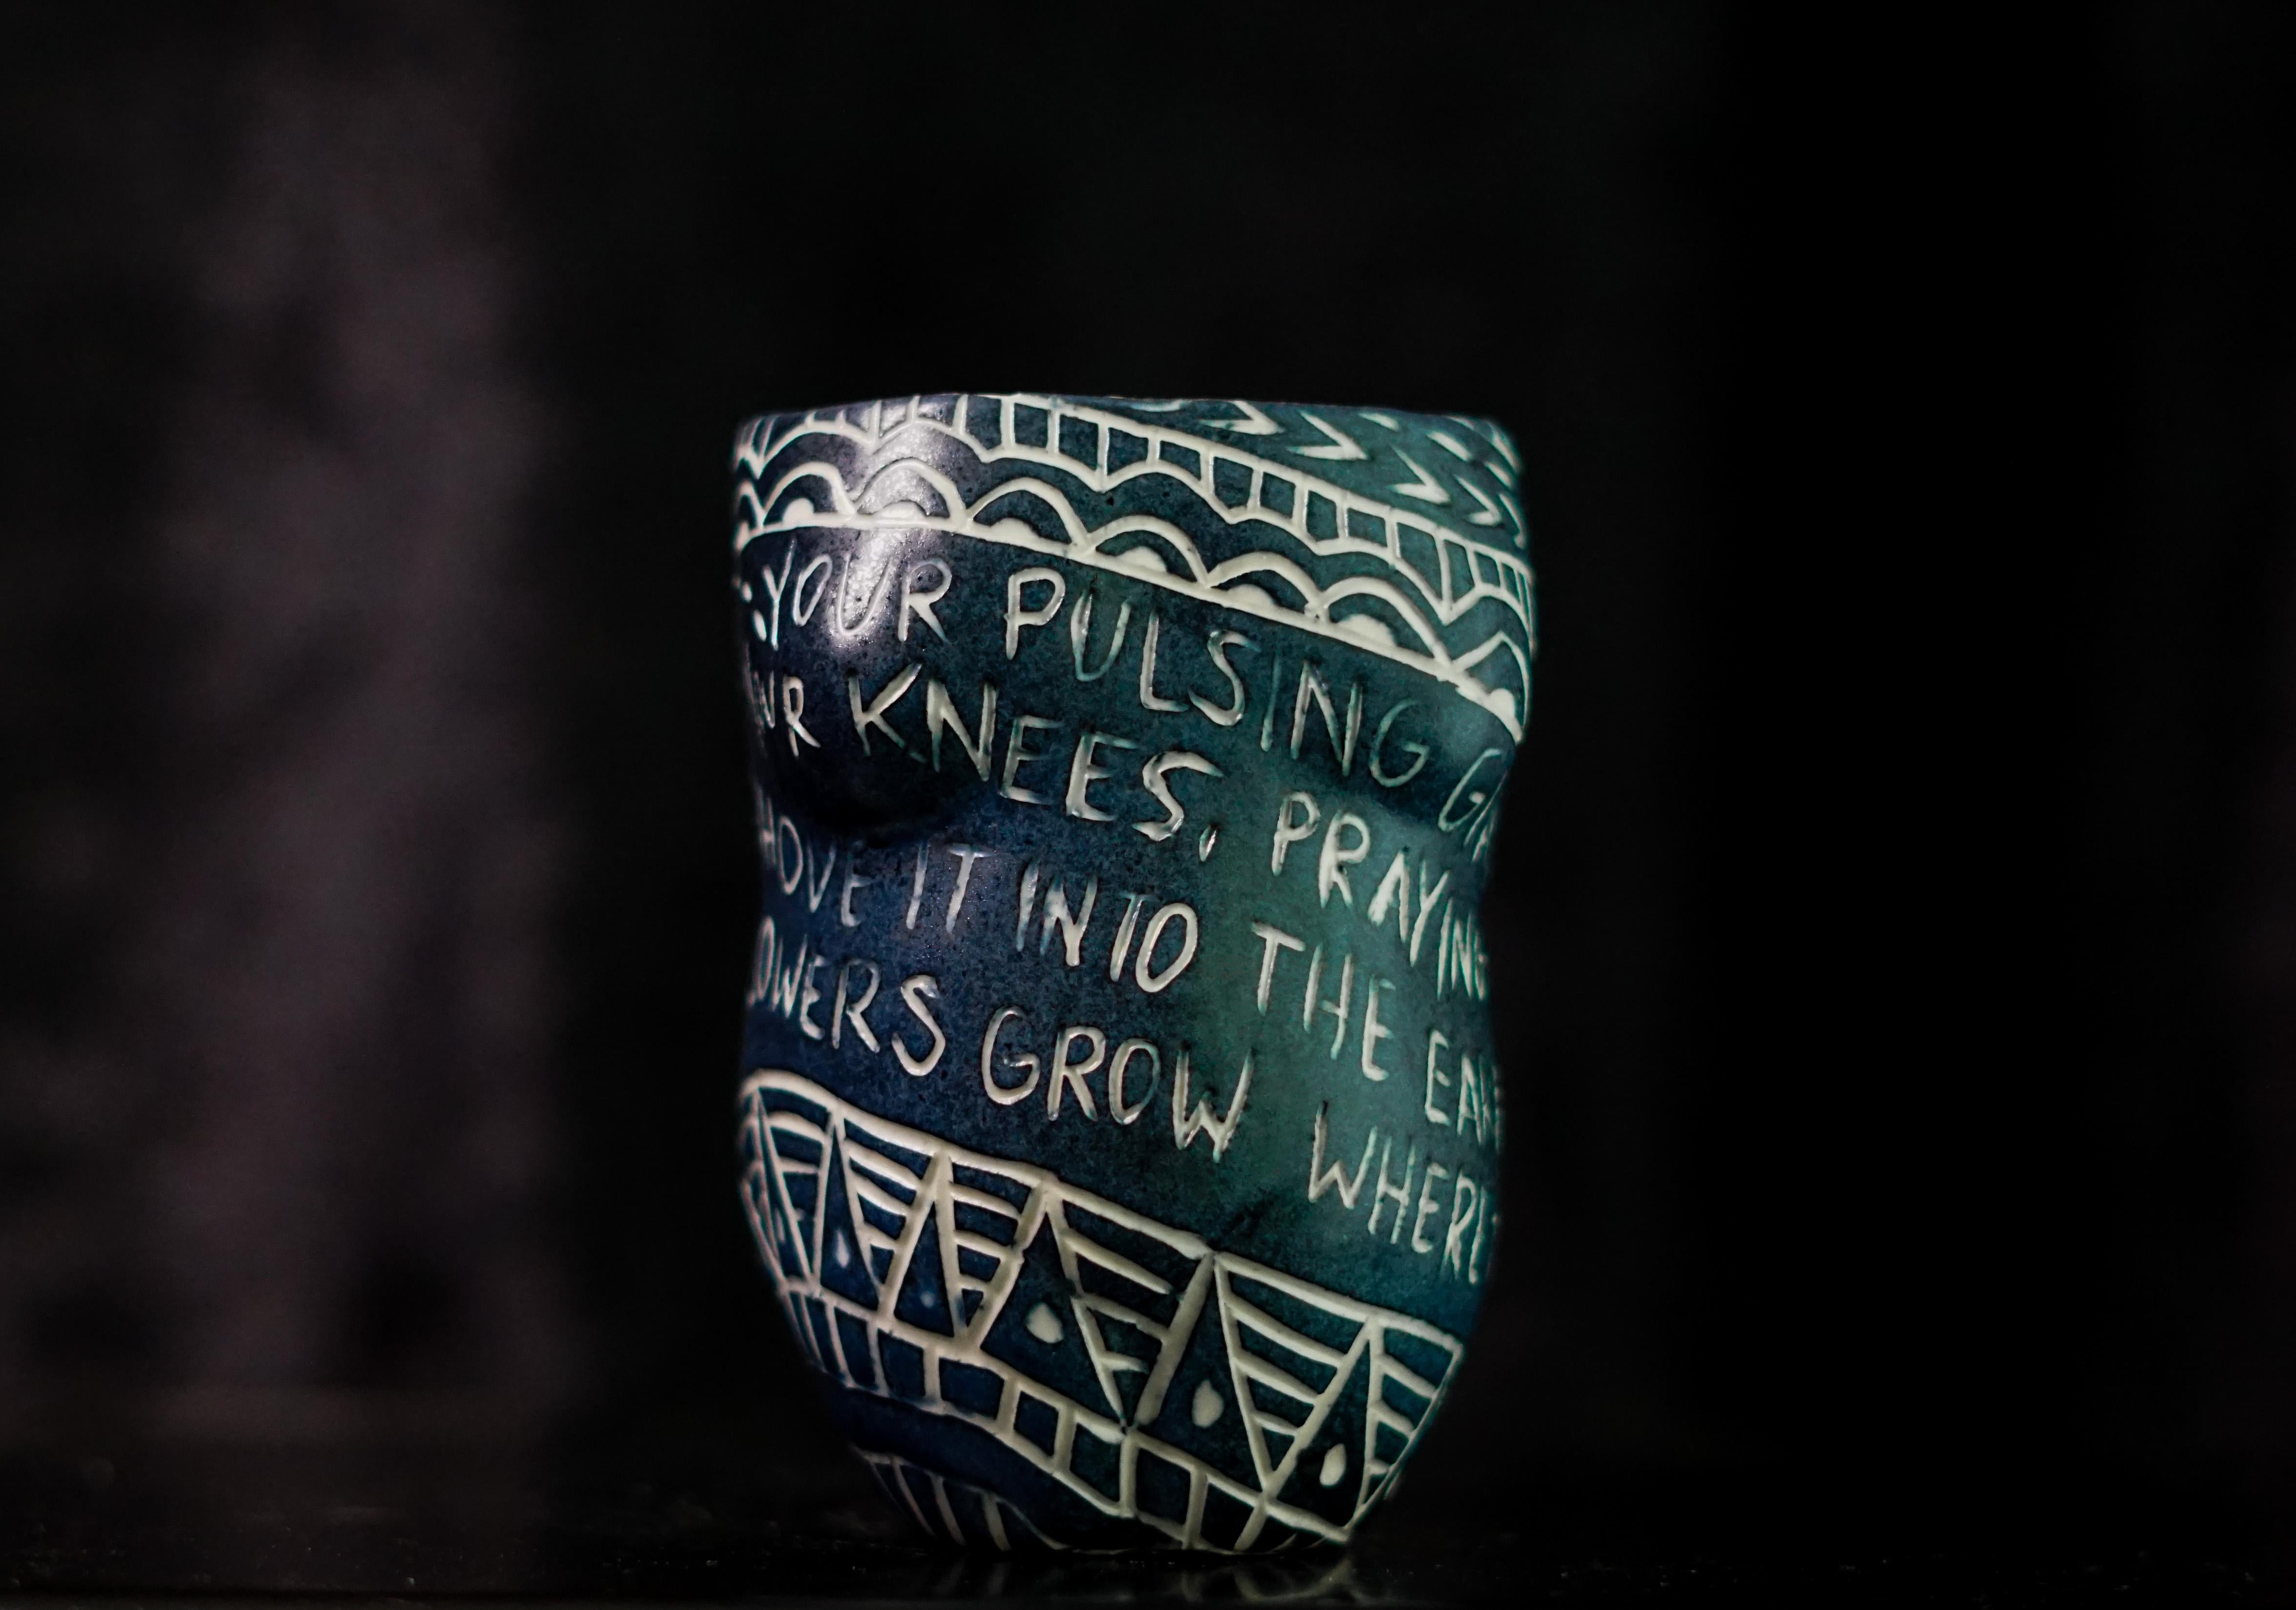 Alex Hodge Abstract Sculpture - “Your Pulsing Giant Heart...” Porcelain cup with sgraffito detailing 